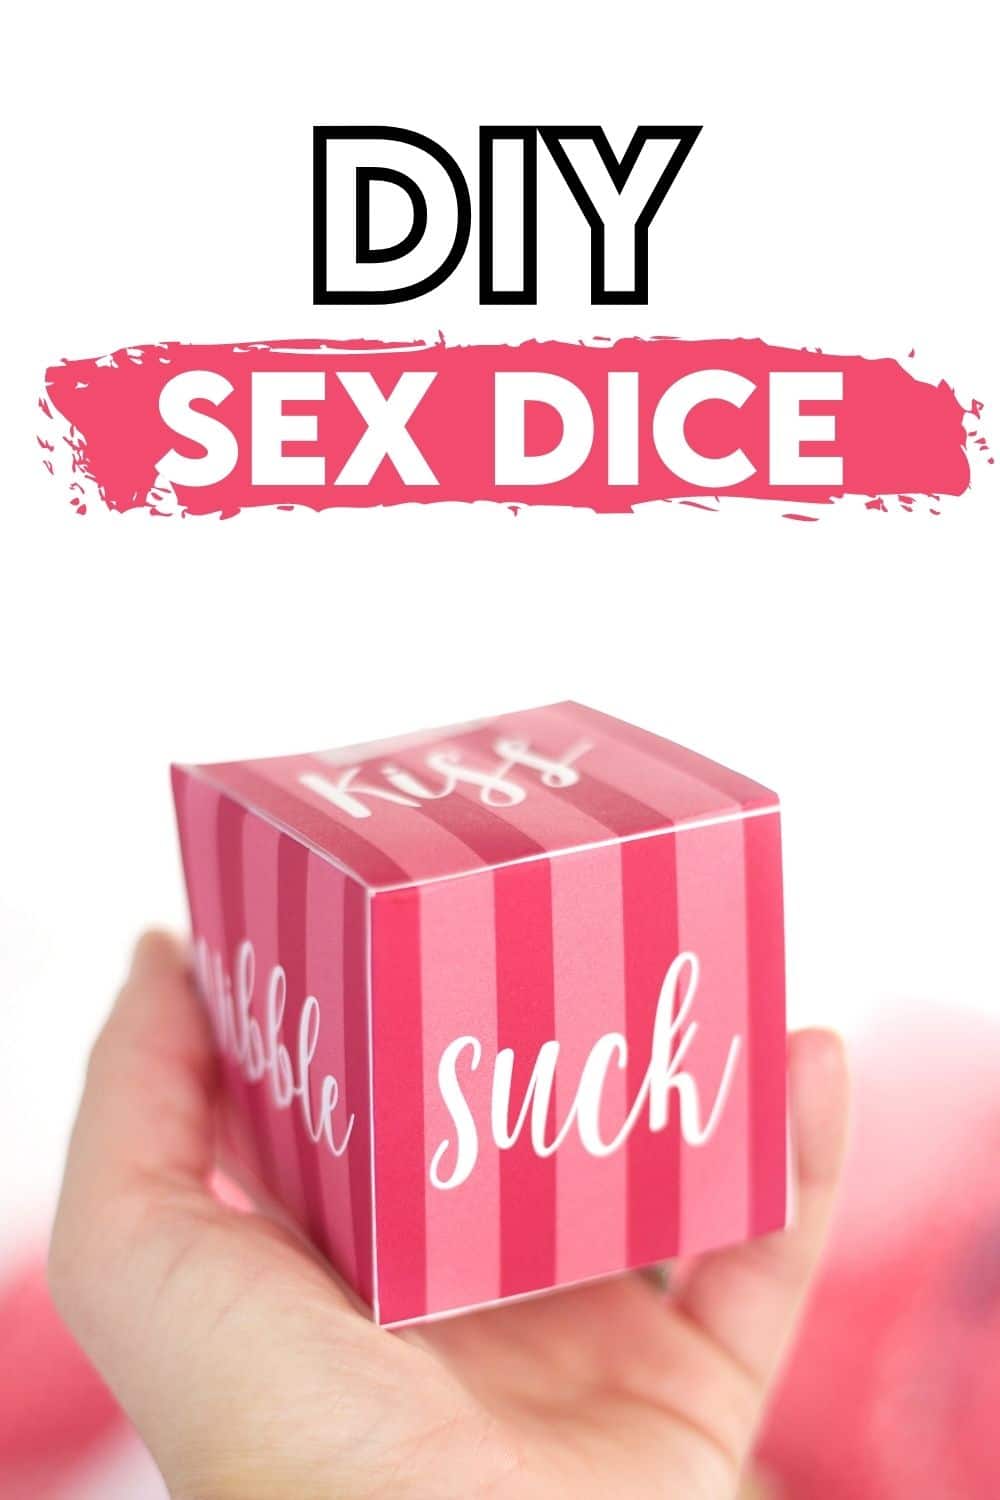 Homemade Sex Simulator - 5 Free Sex Dice to Spice Things Up in the Bedroom | The Dating Divas